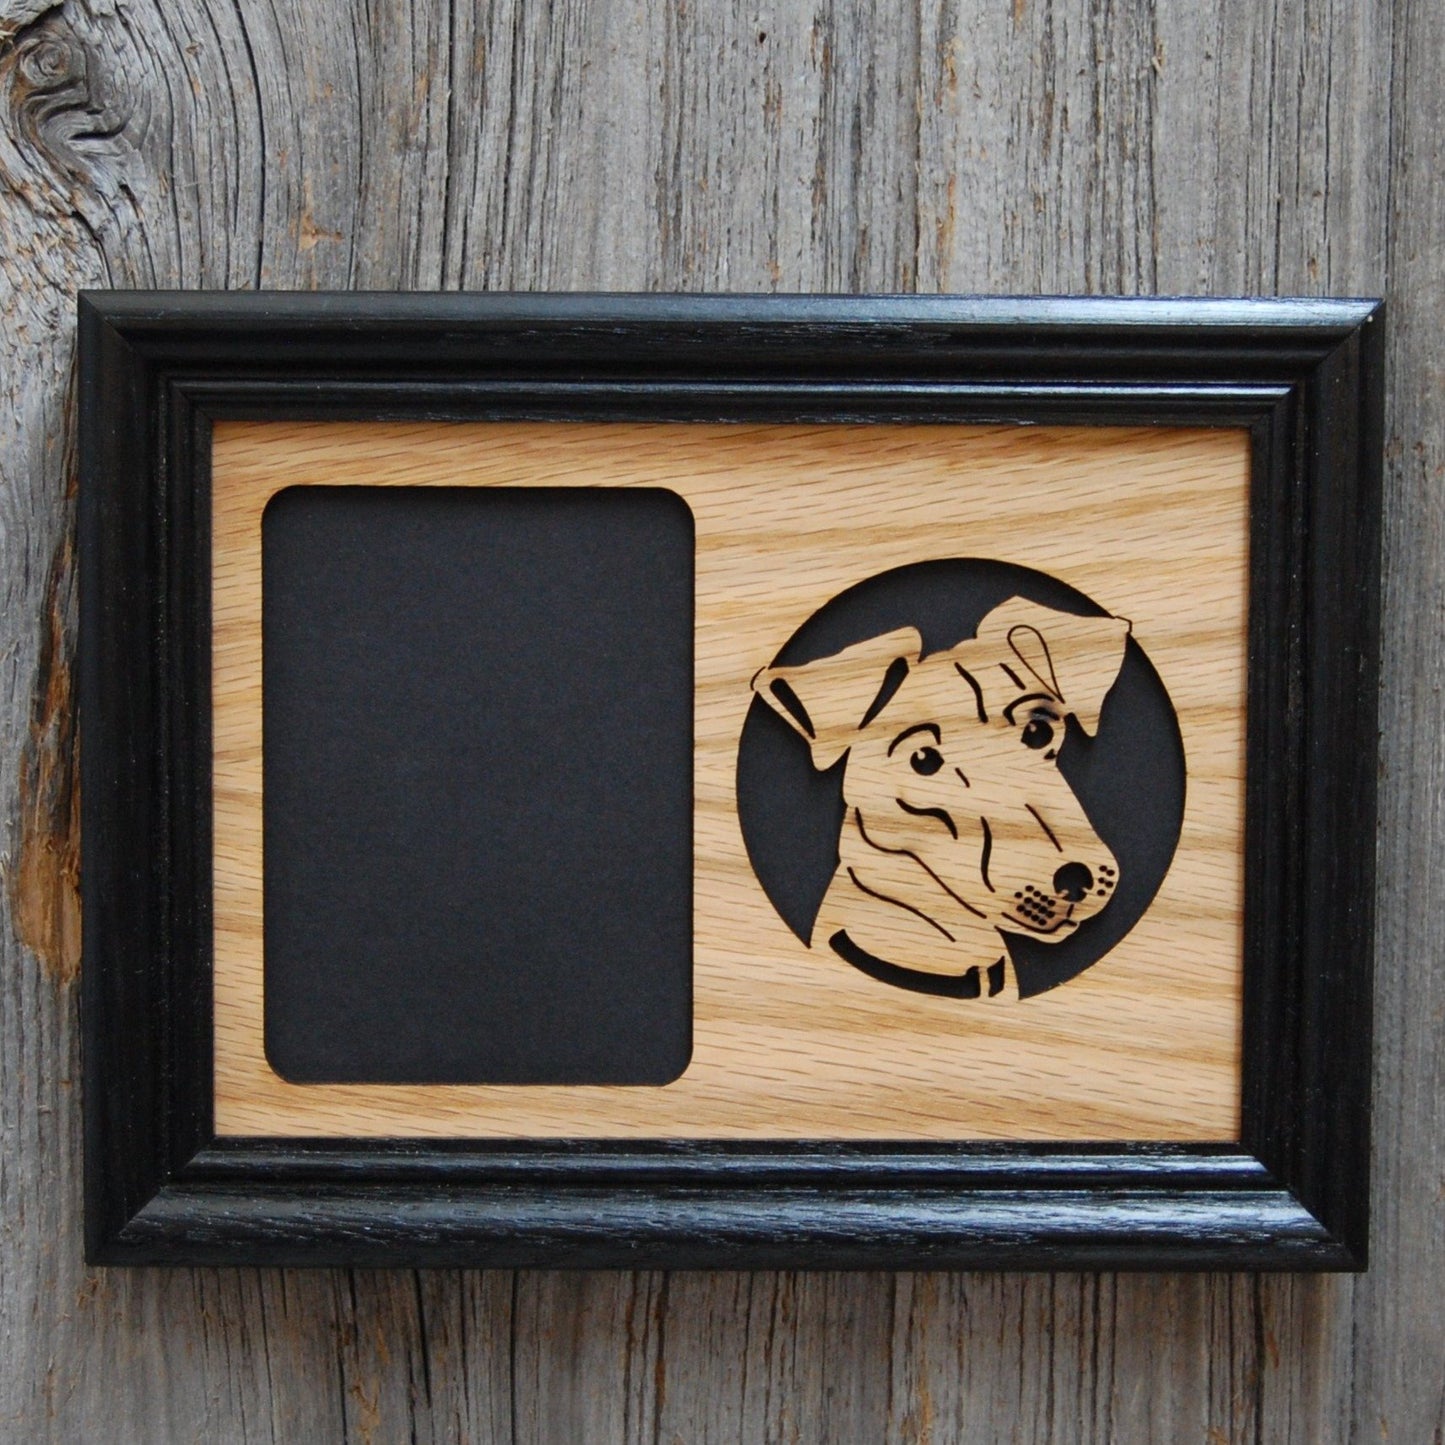 Dog Portrait Picture Frame - 5x7 Frame Holds a 3x4 Photo